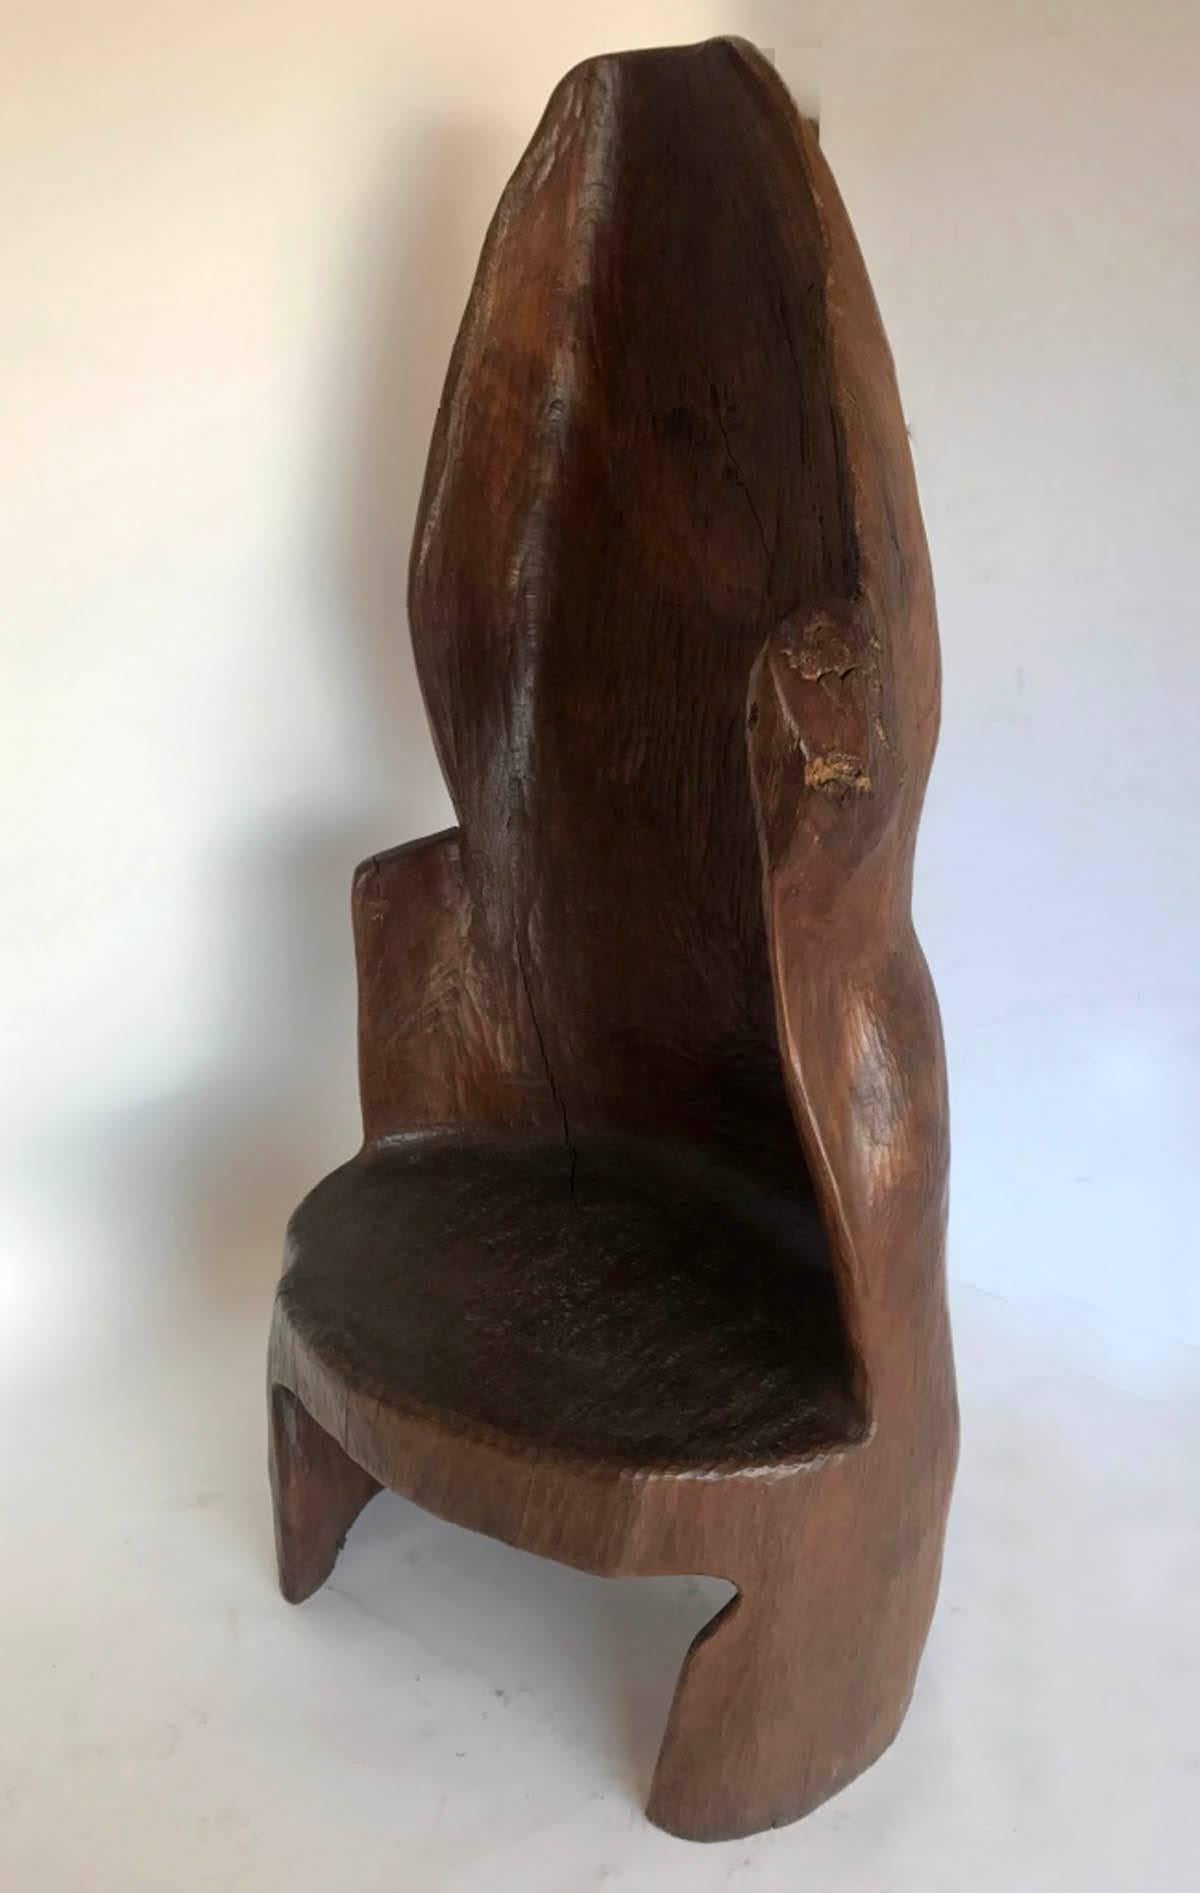 Sitting in this chair is like being inside a cocoon. It's large and surrounds you. The carver had a sense of humor when carving the back, see photo!
nice, smooth patina throughout, some natural cracking but doesn't interfere with sturdiness. Carved